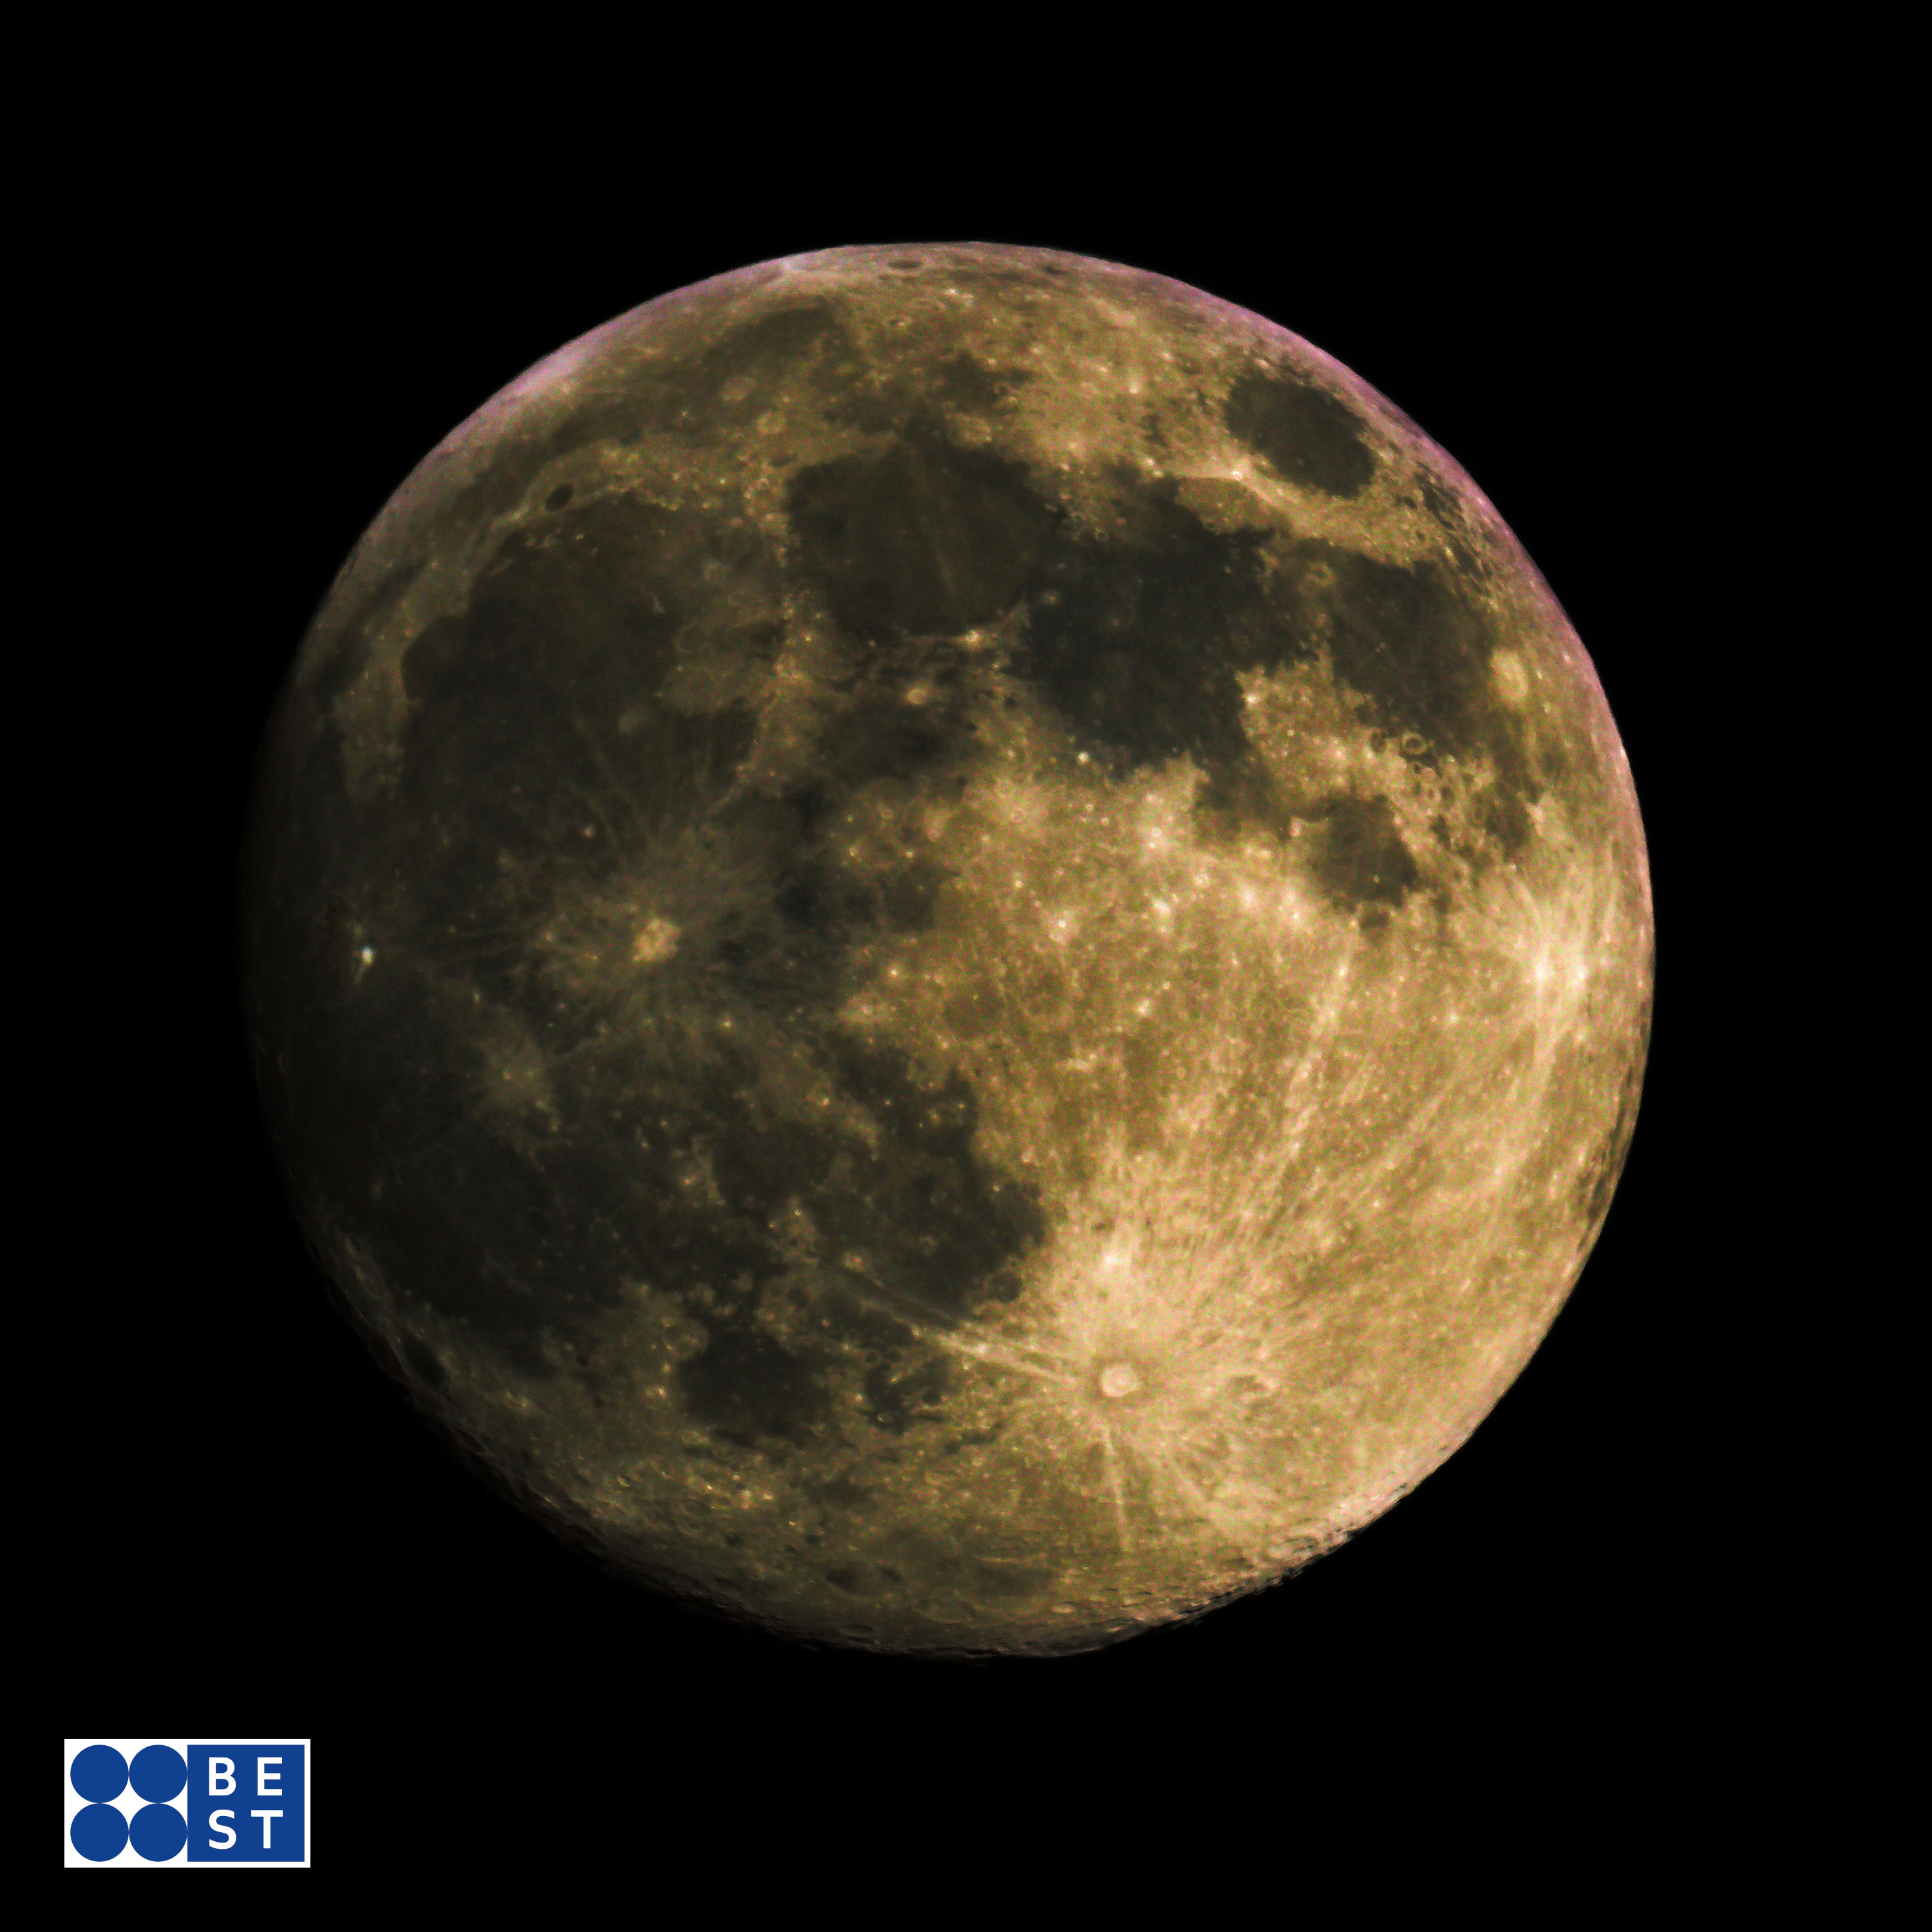 A picture of the moon taken by the Berry Empire Space & Telemetry team